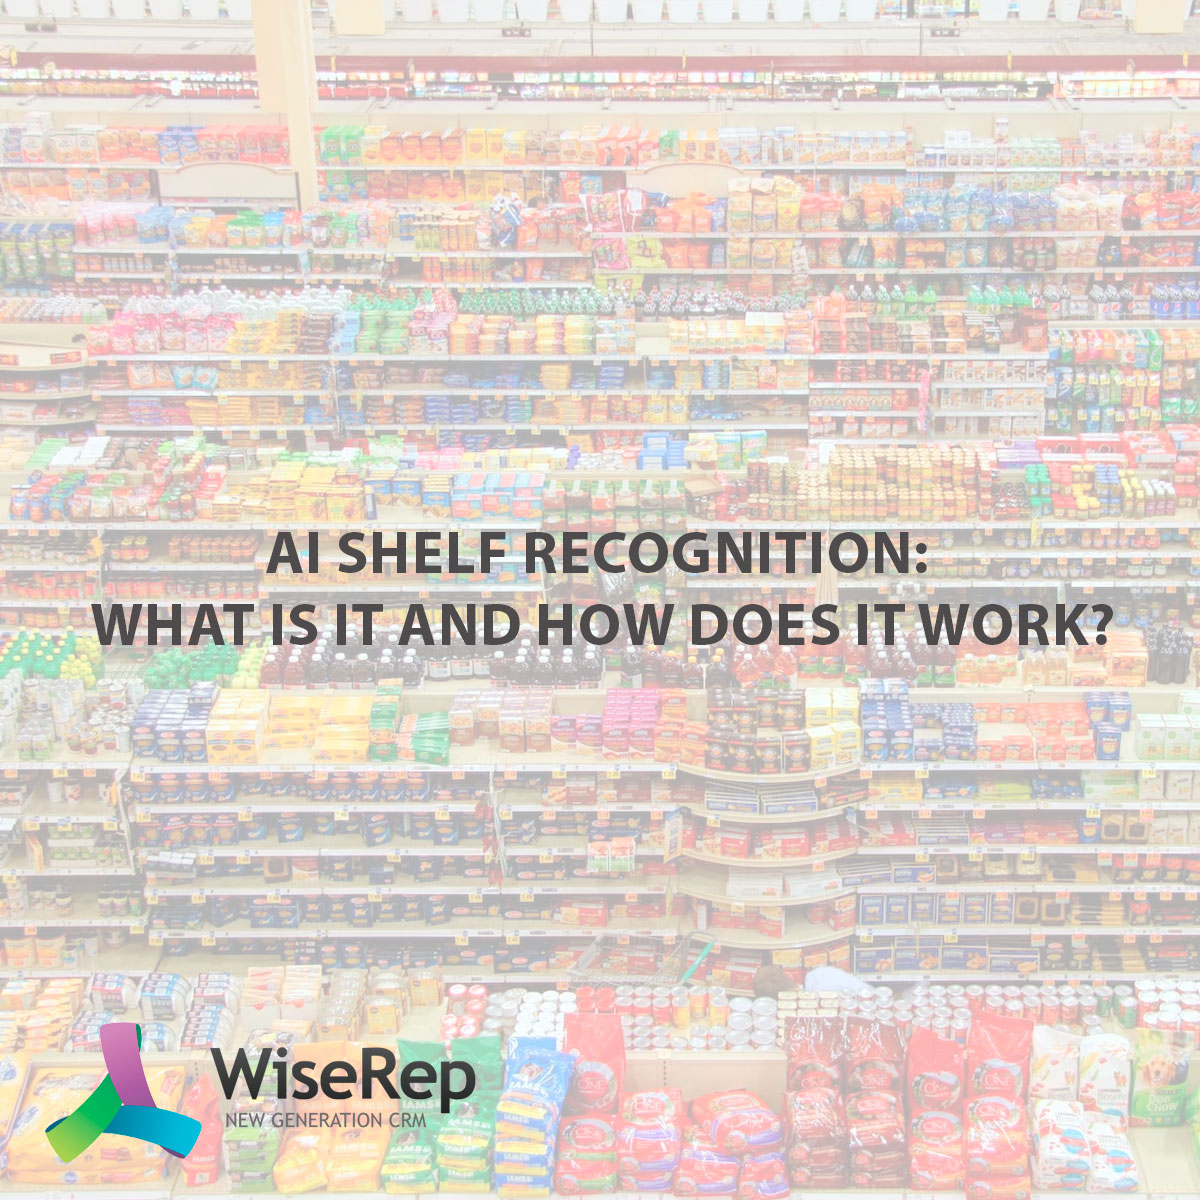 AI Shelf Recognition: What Is It and How Does It Work?